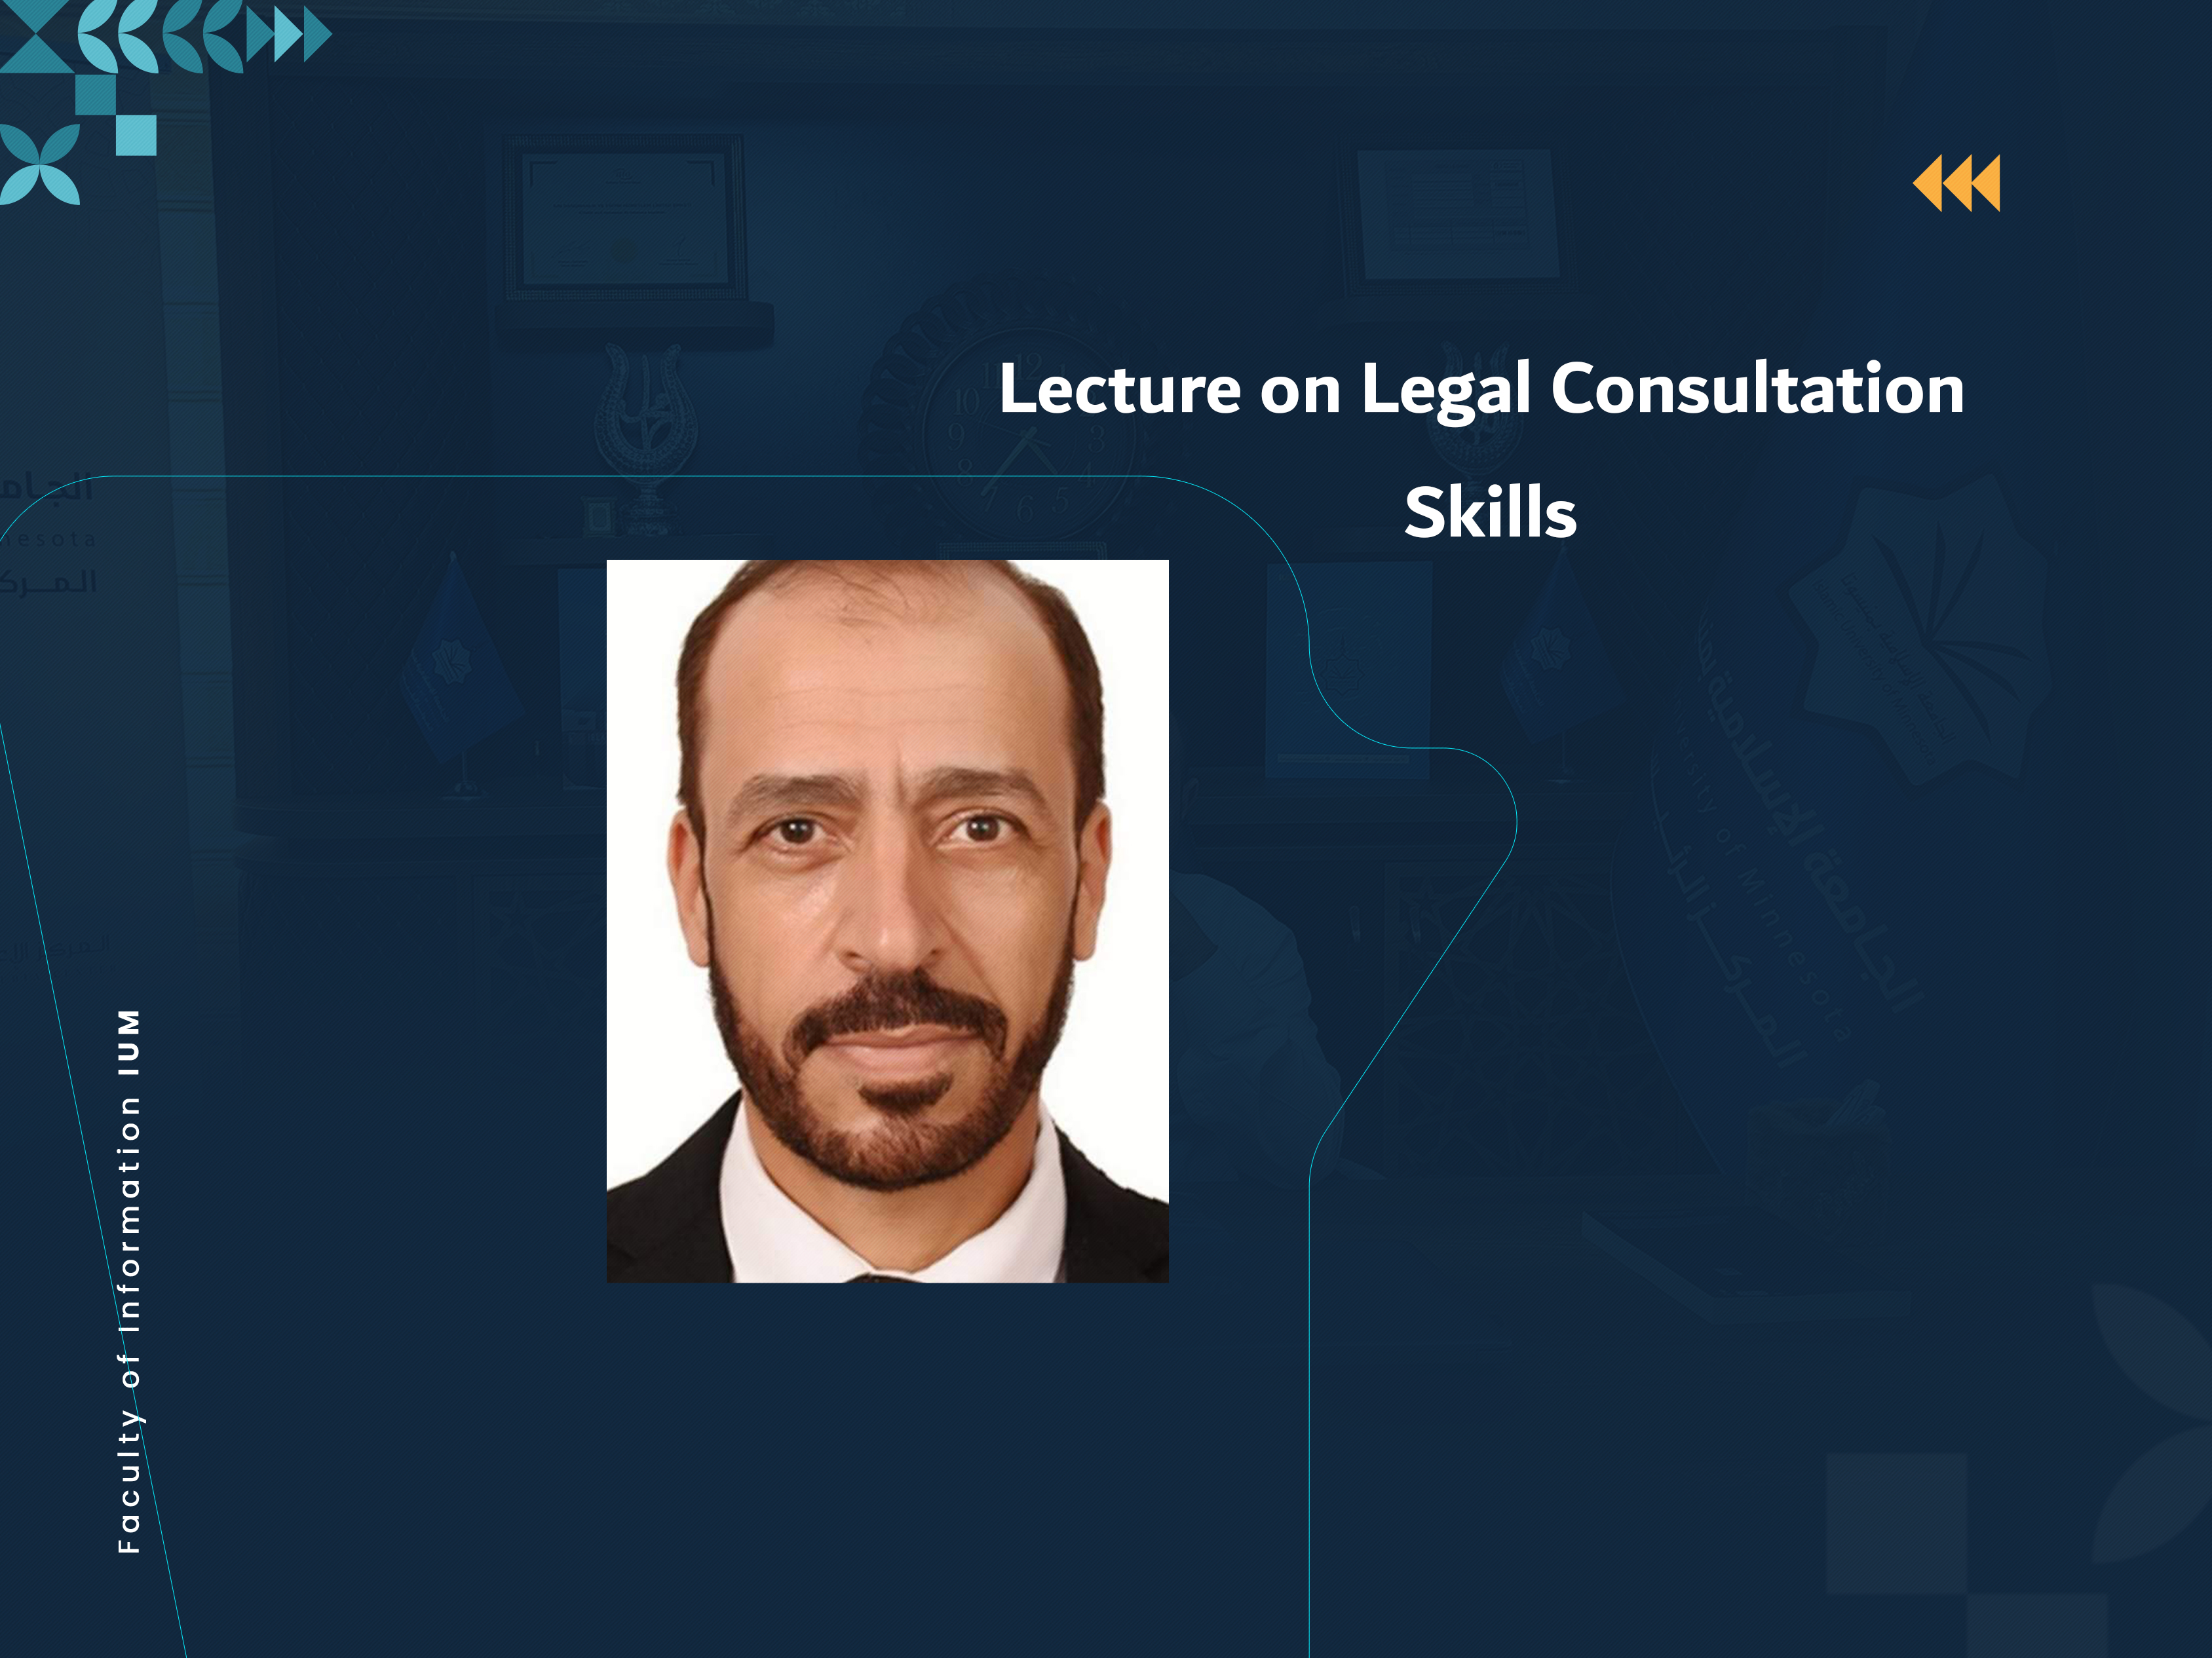 Lecture on Legal Consultation Skills